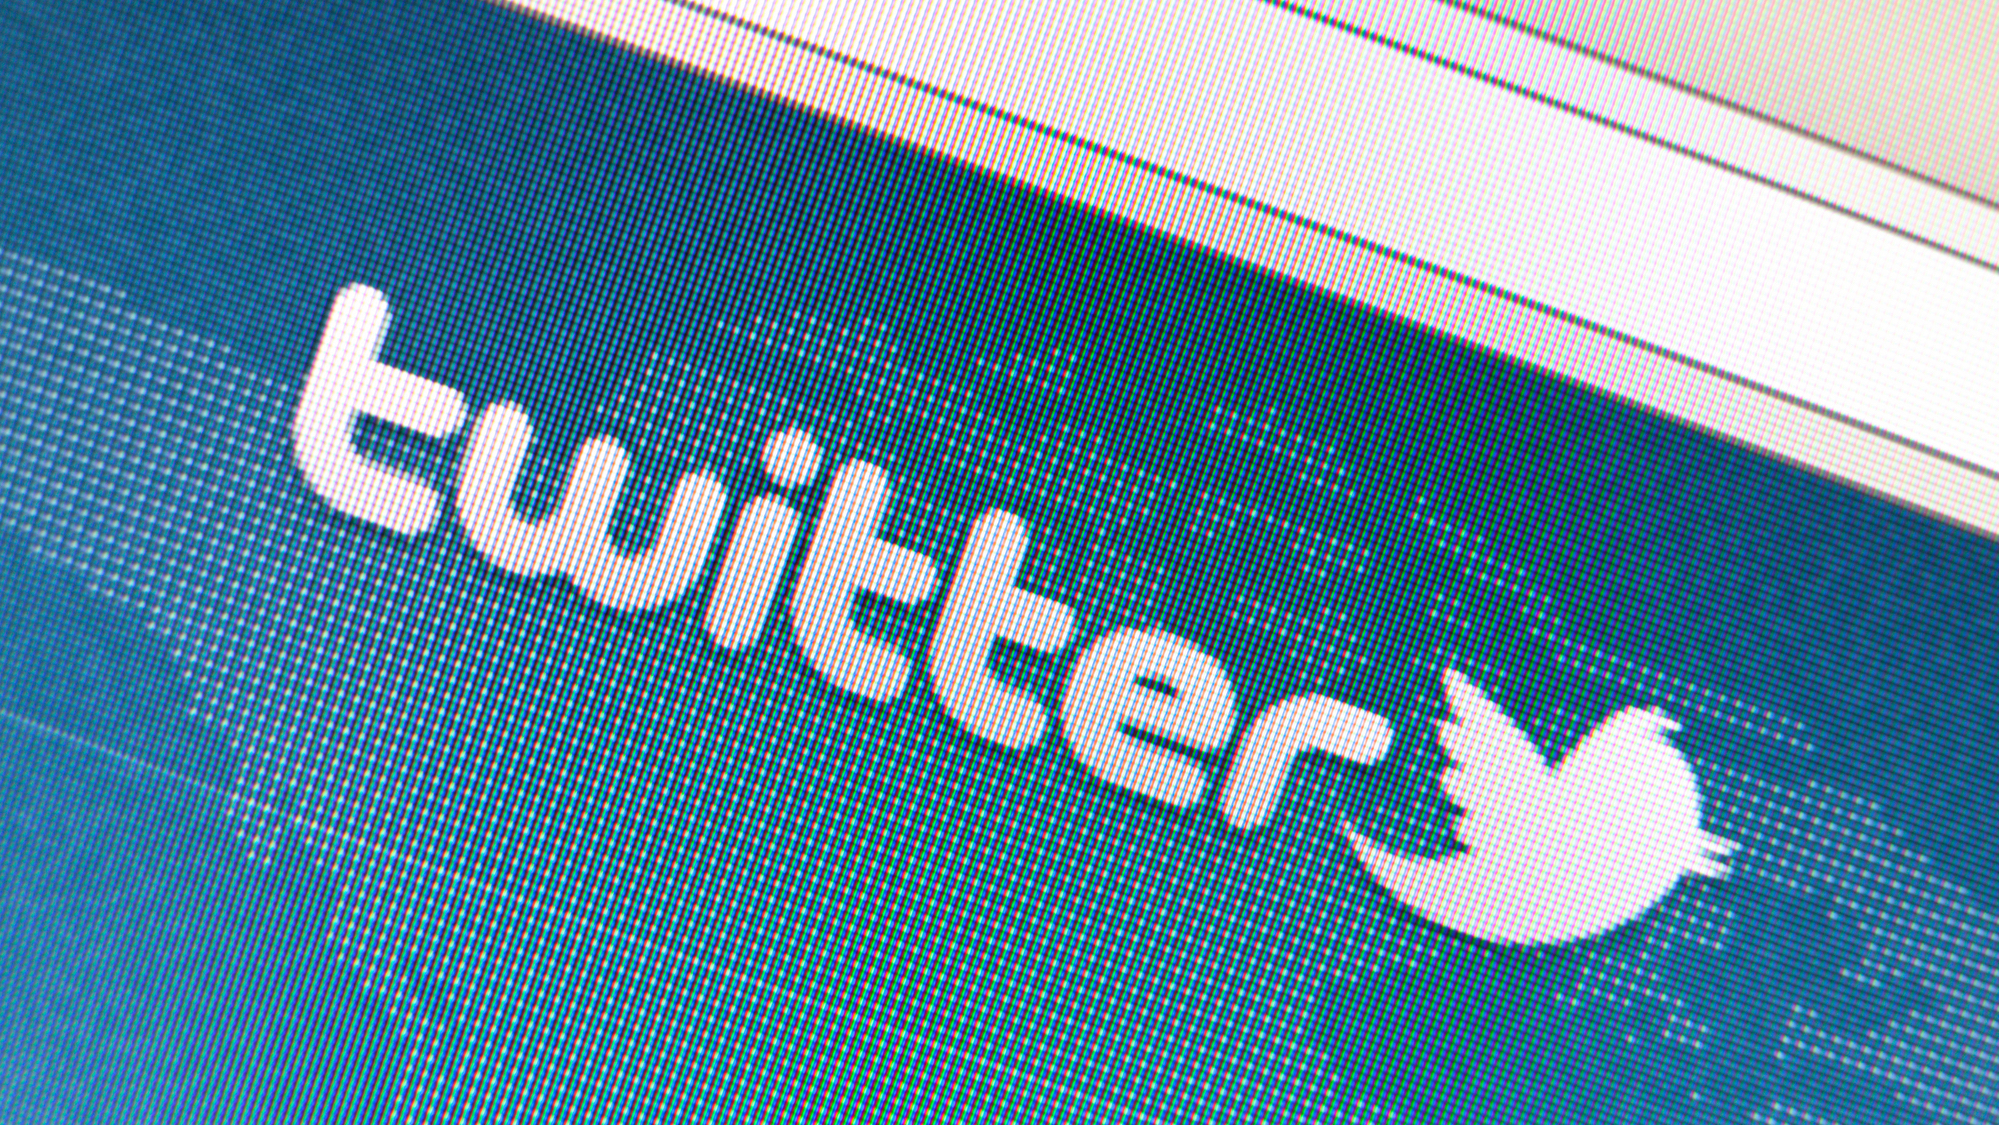 Twitter announced some new features, then temporarily crashed